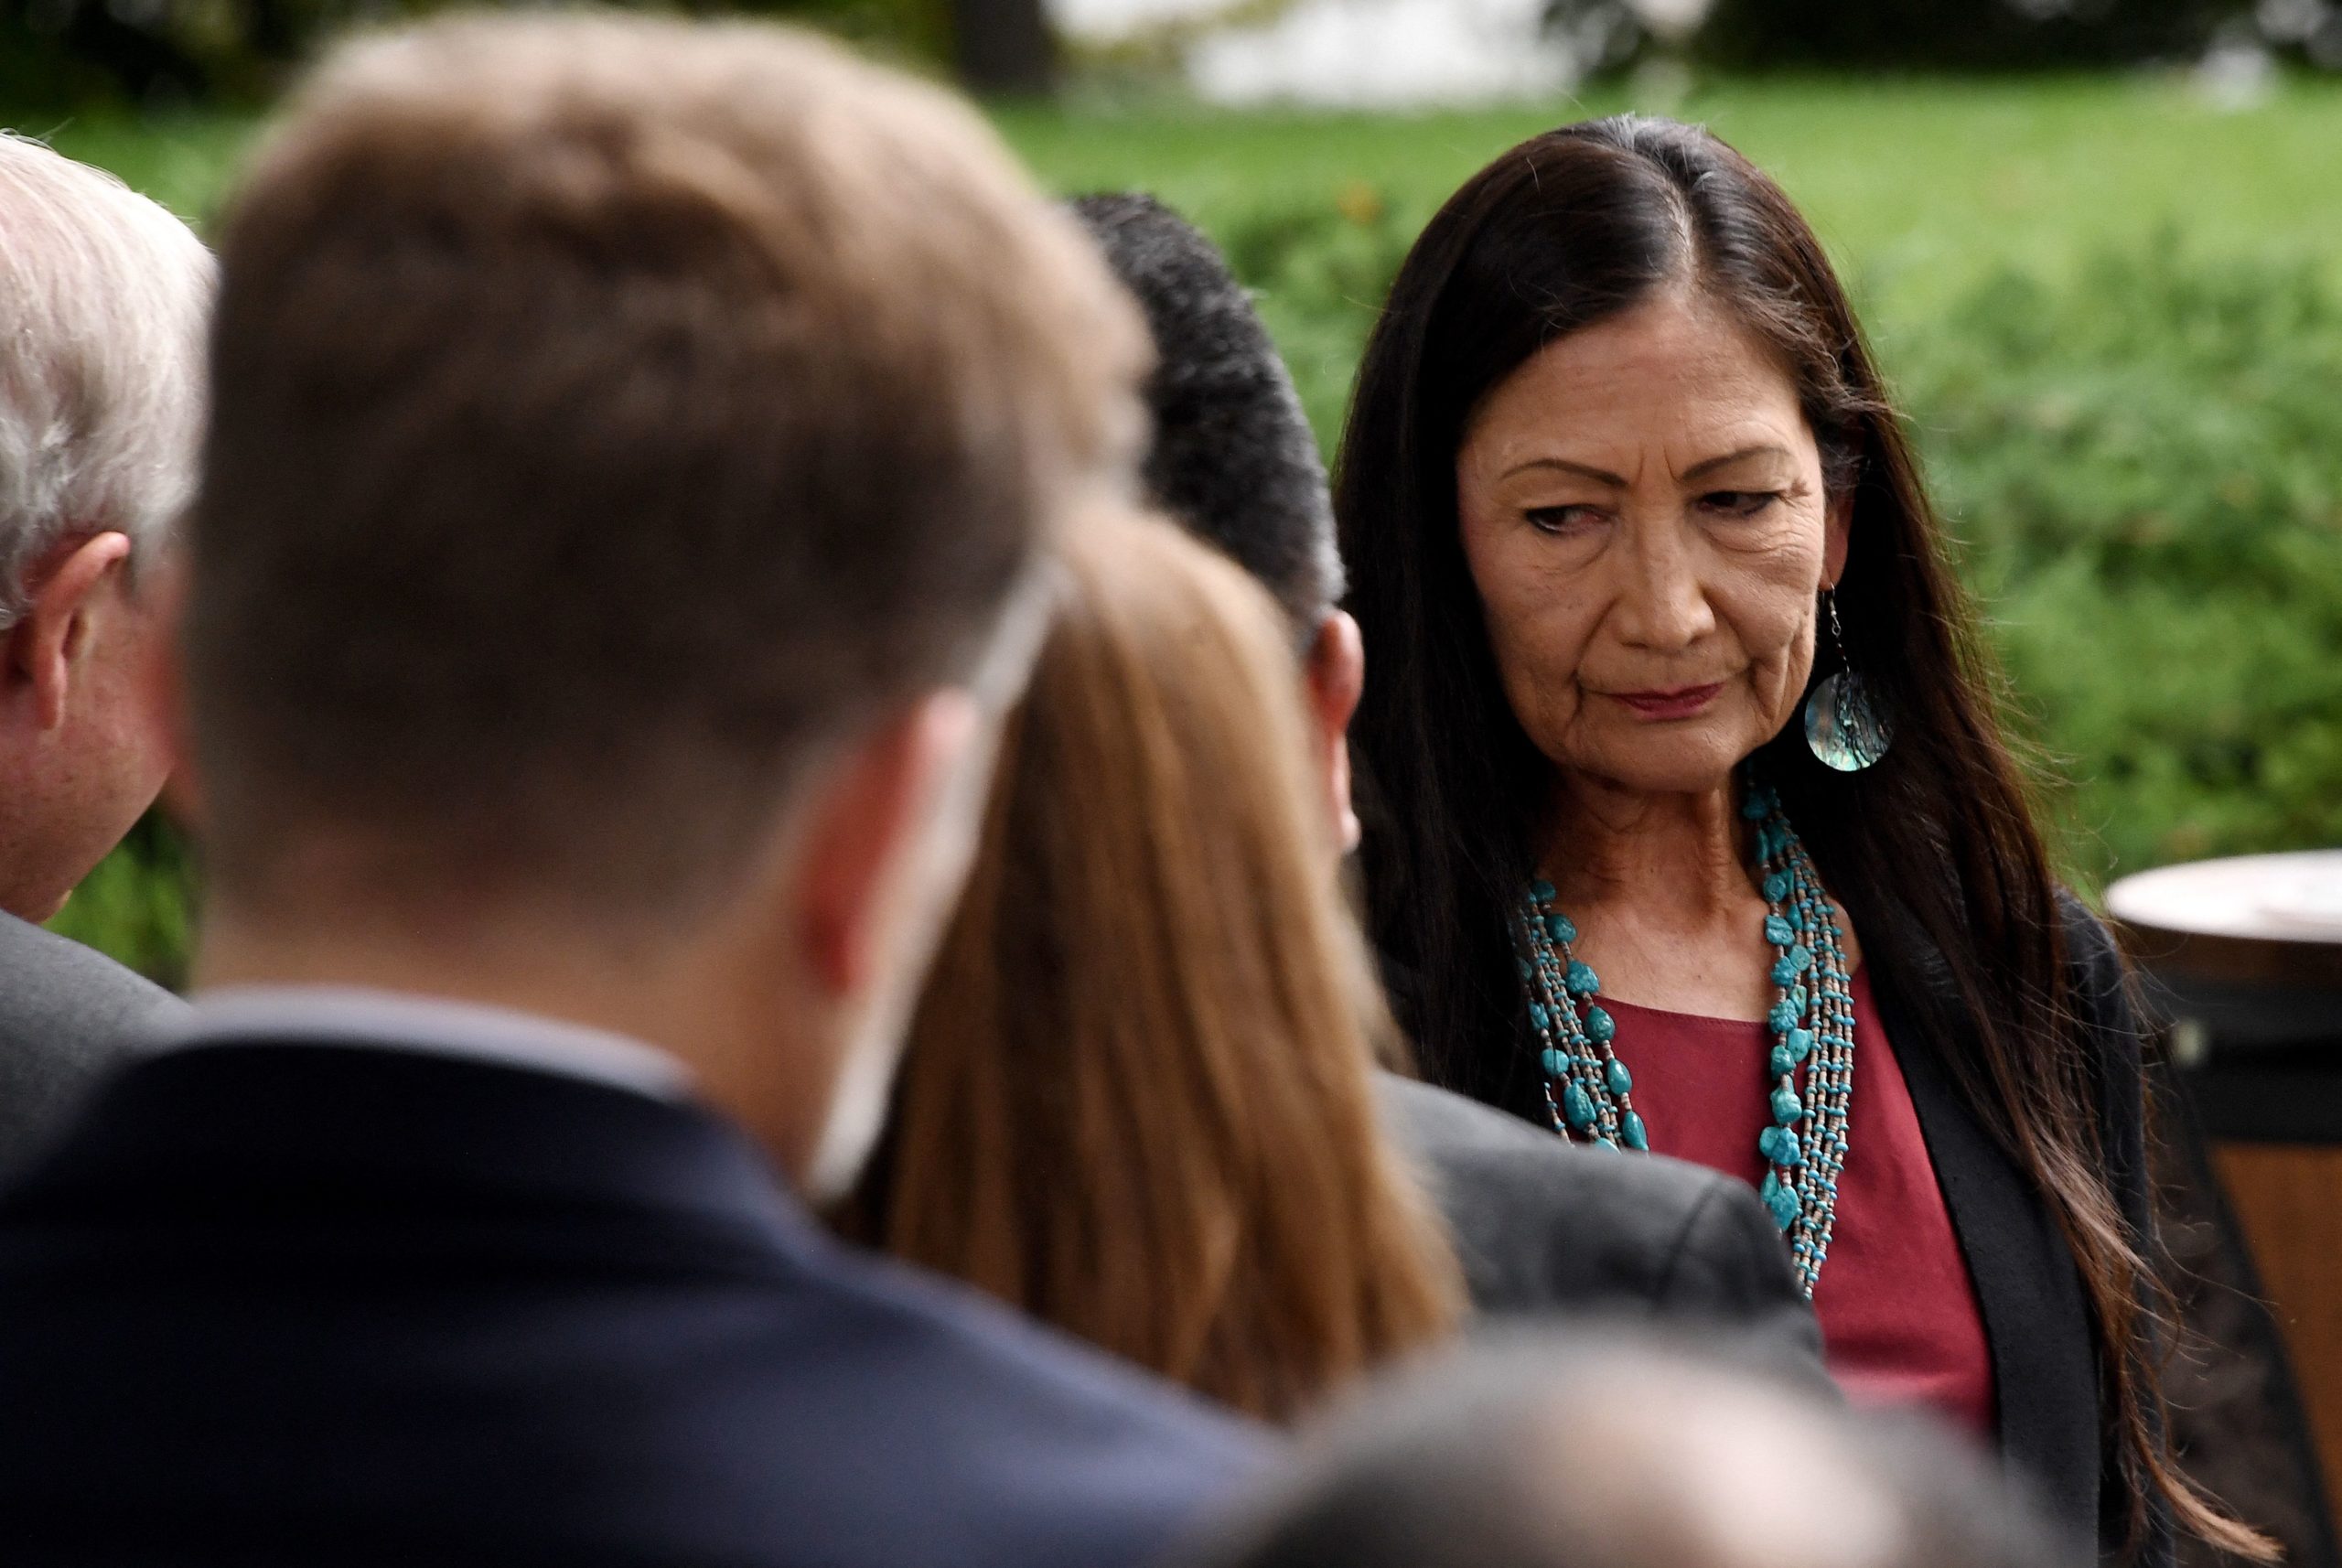 Interior Secretary Deb Haaland attends a signing ceremony for three proclamations restoring protections for national monuments on Oct. 8 at the White House. (Olivier Douliery/AFP via Getty Images)